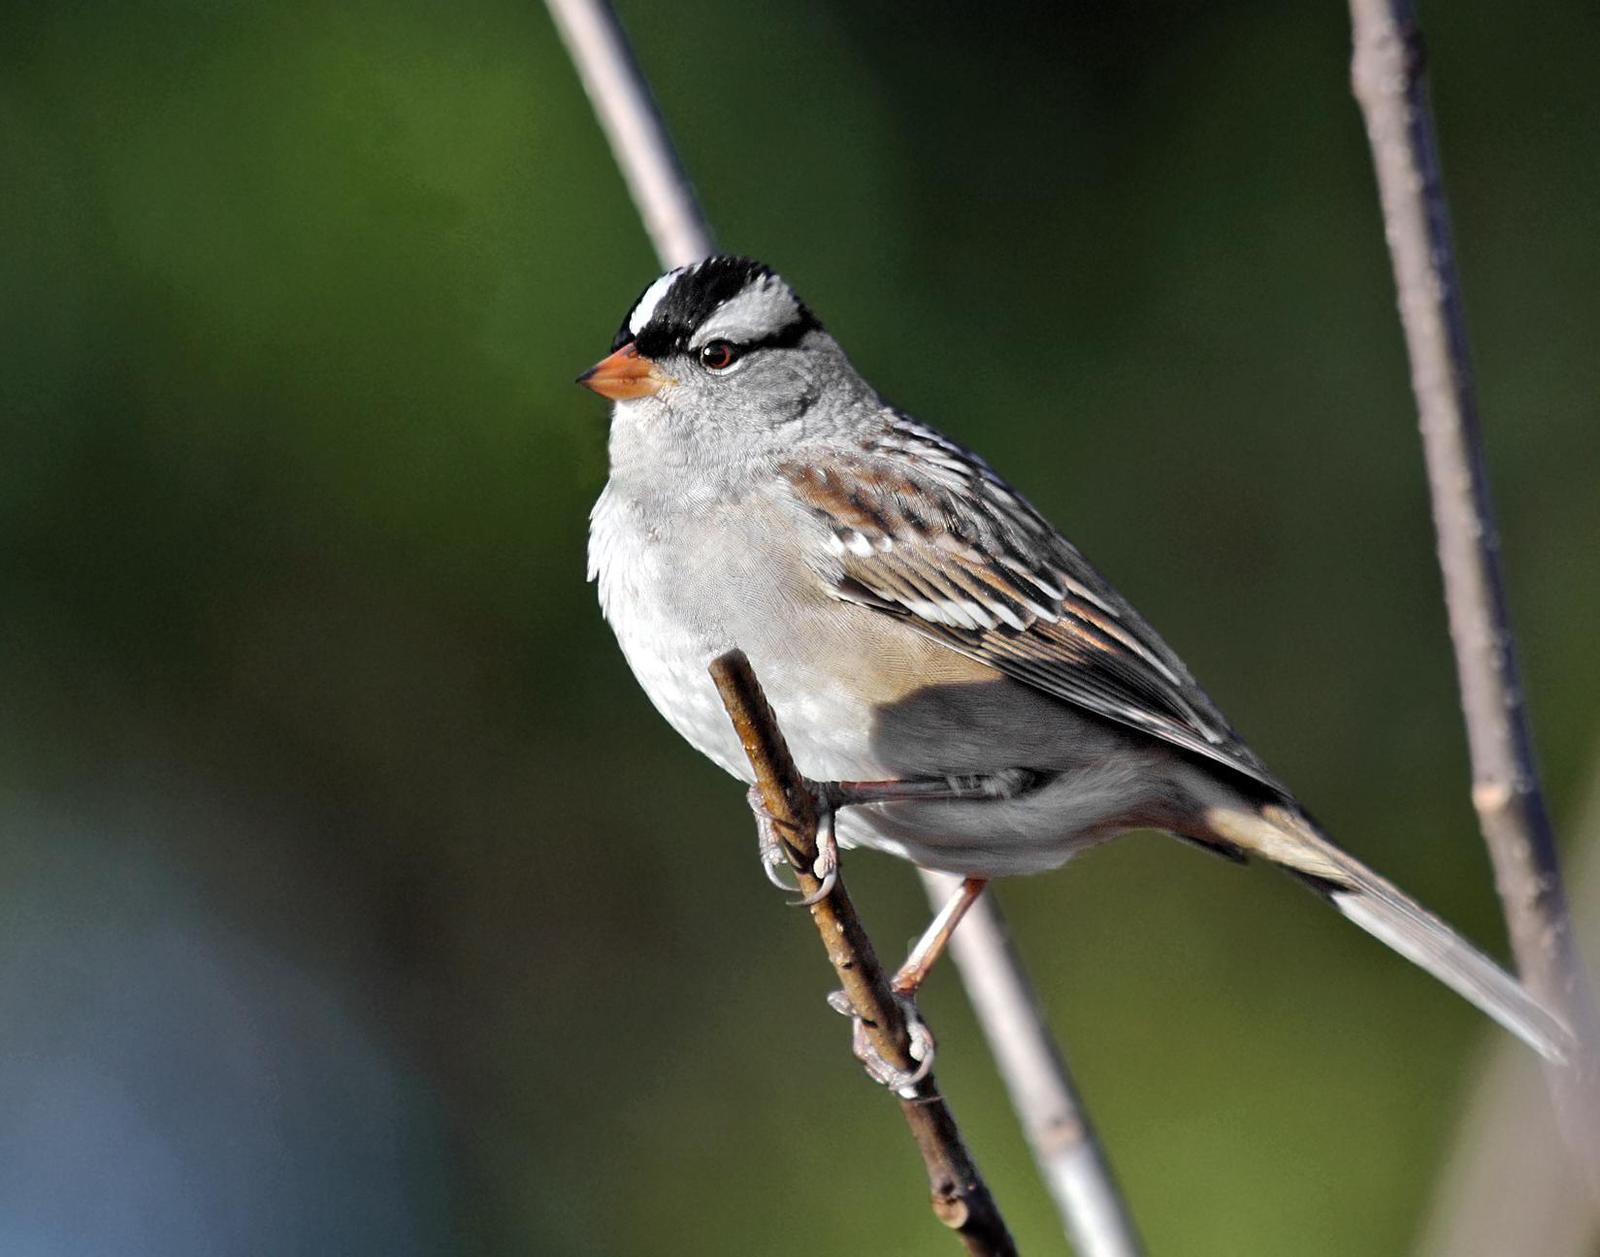 White-crowned Sparrow Photo by Joseph Pescatore